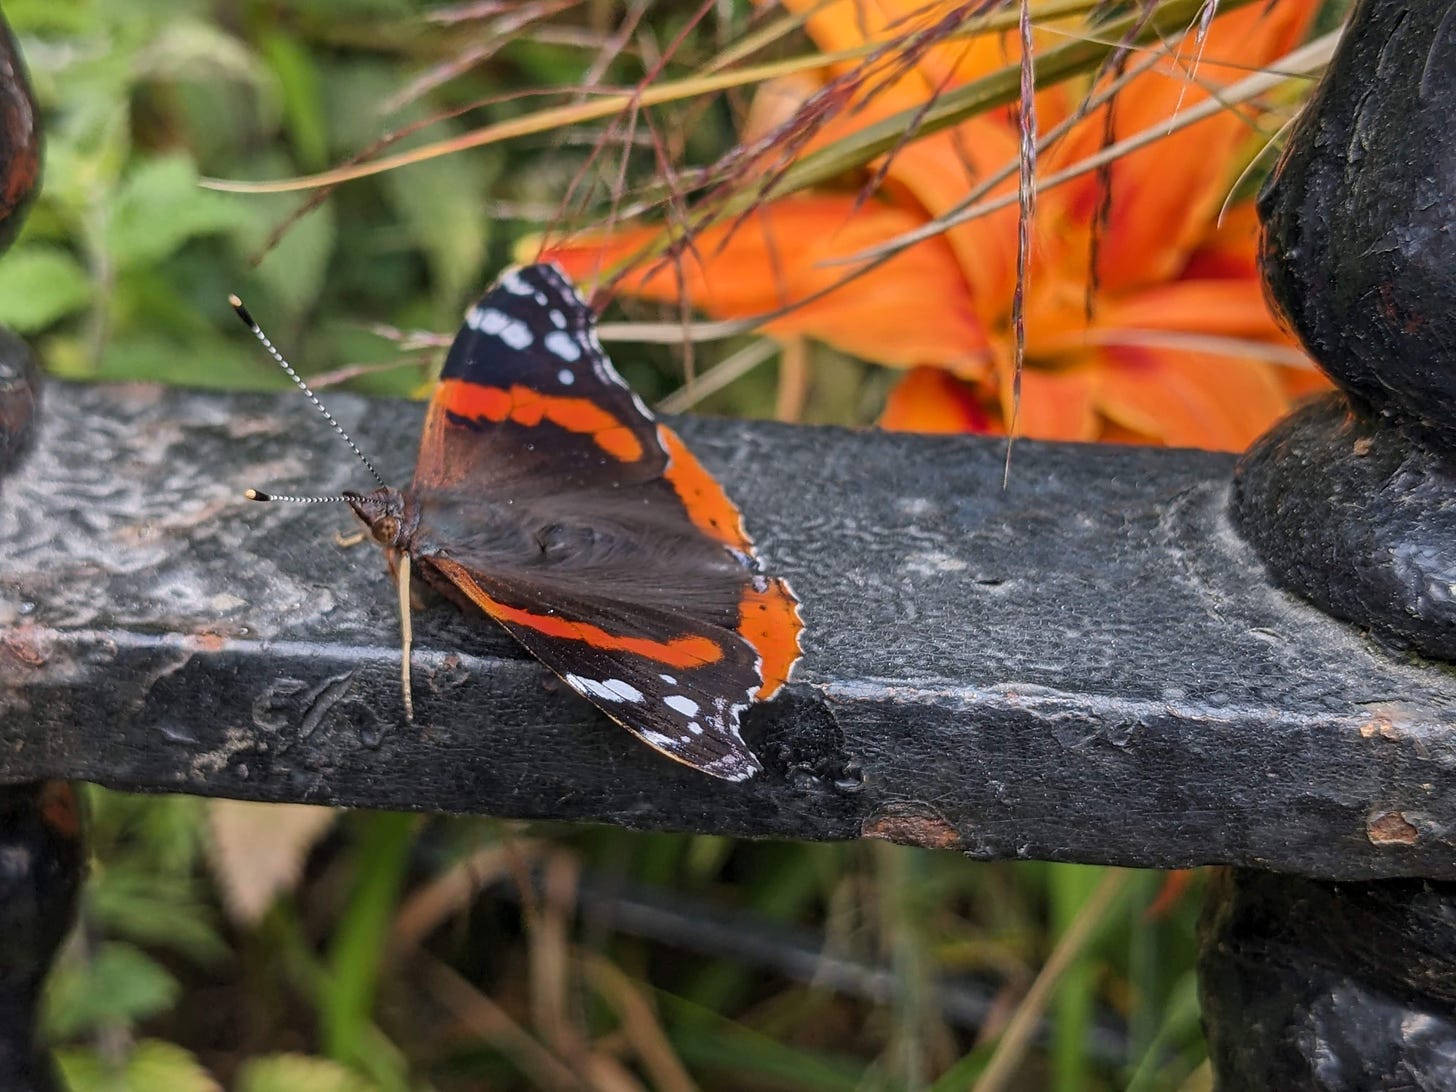 an orange and black butterfly pauses, wings open, on a black-painted iron gate.